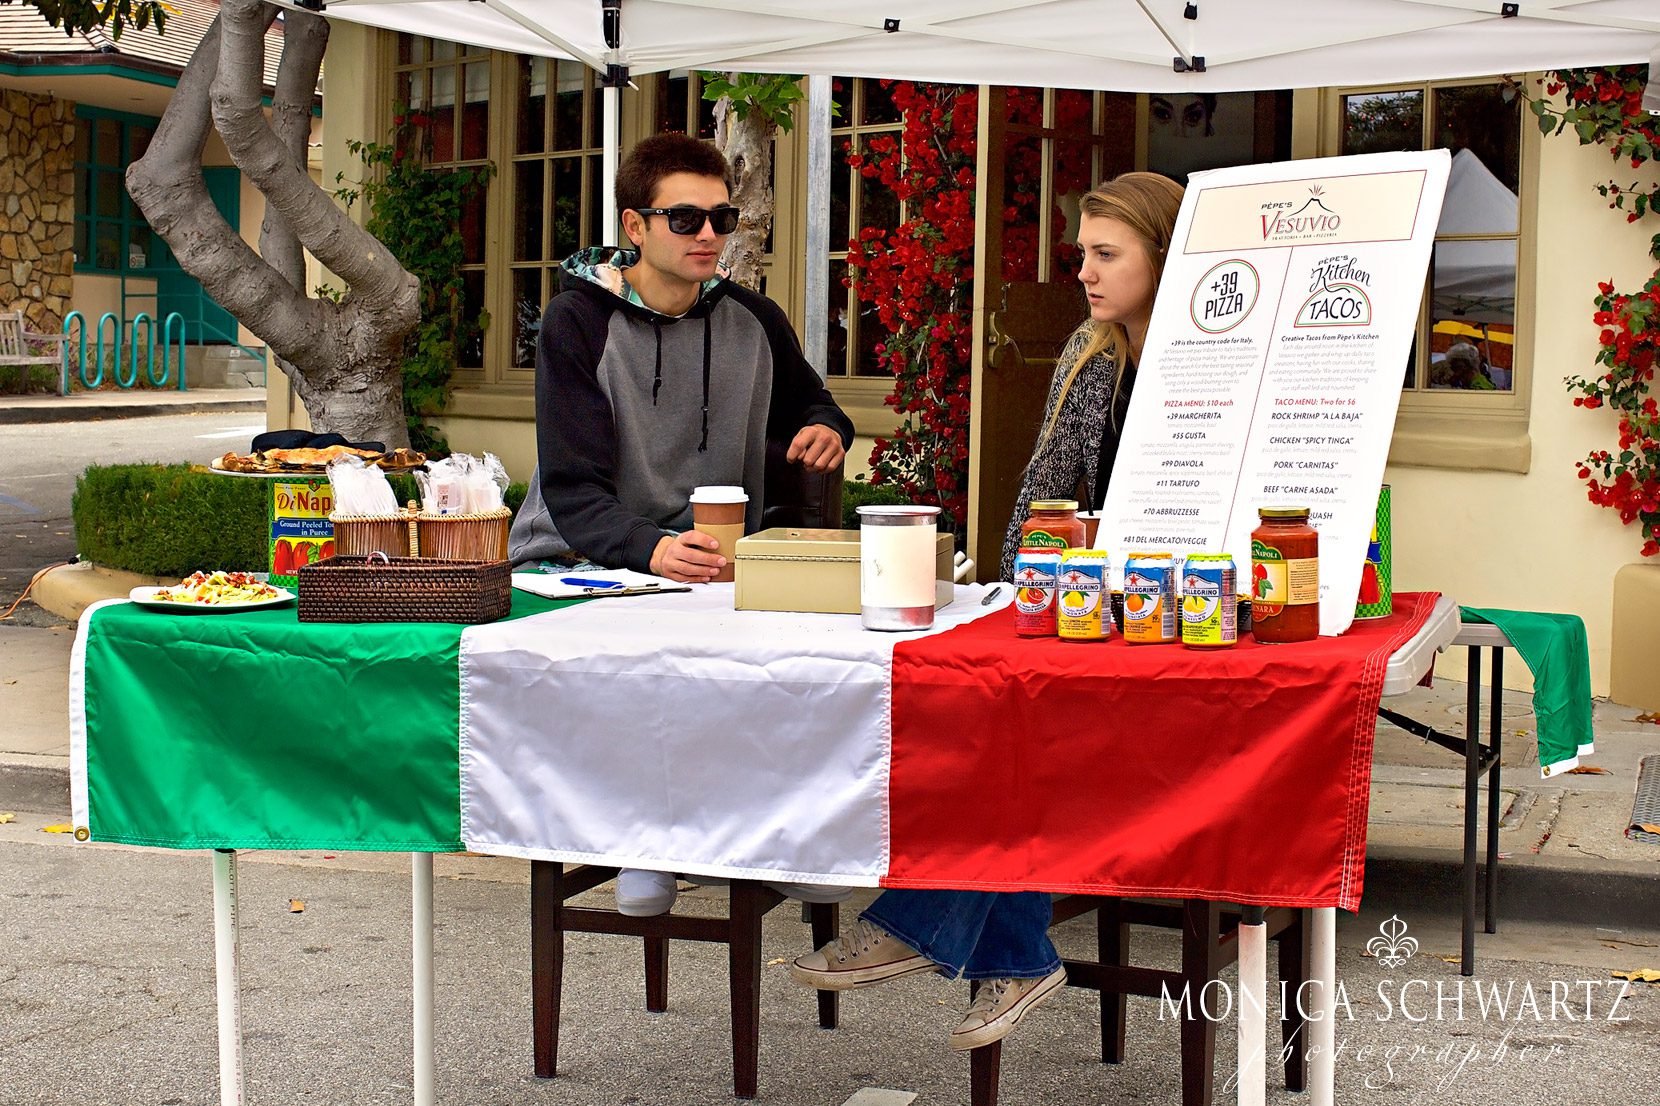 The-stand-of-Pepes-Vesuvio-Restaurant-at-the-Farmers-Market-in-Carmel-by-the-Sea-California